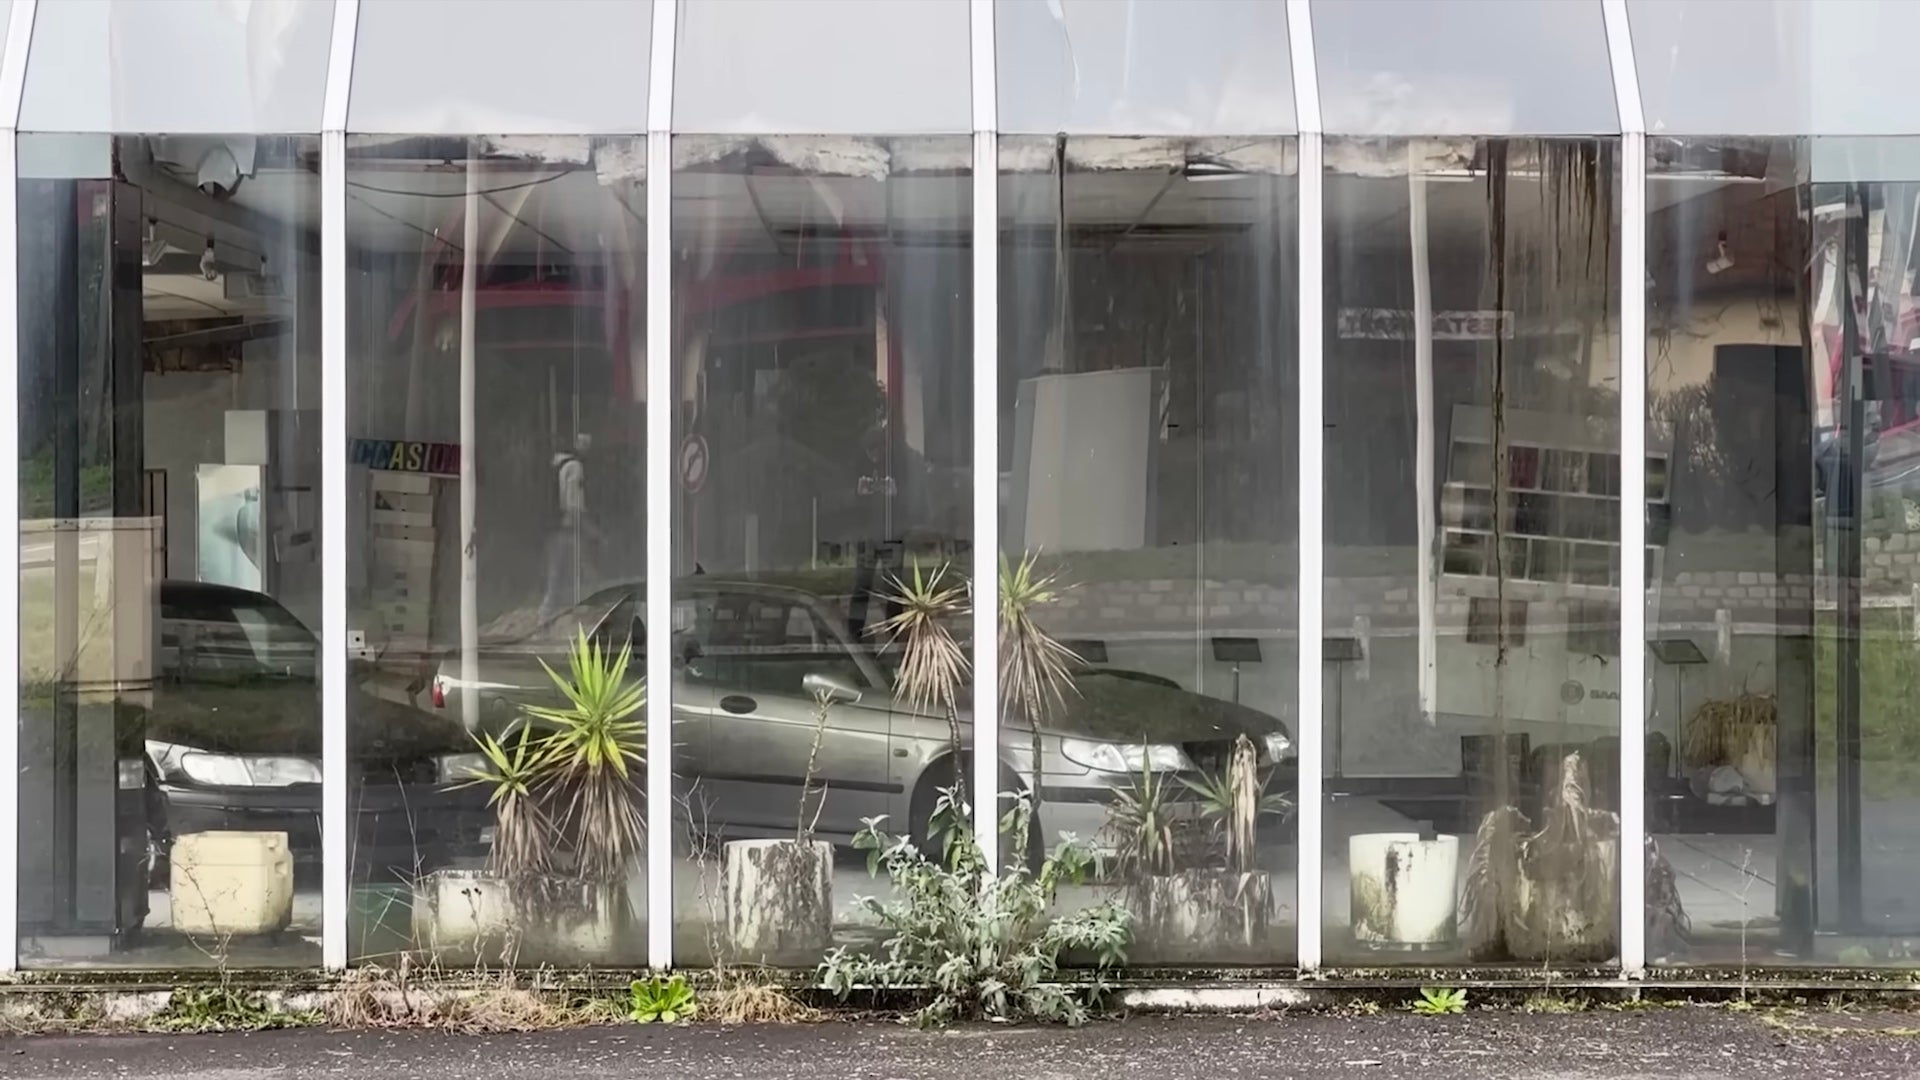 When Thieves Arrived, an Abandoned Saab Dealership Transformed into a Time Capsule